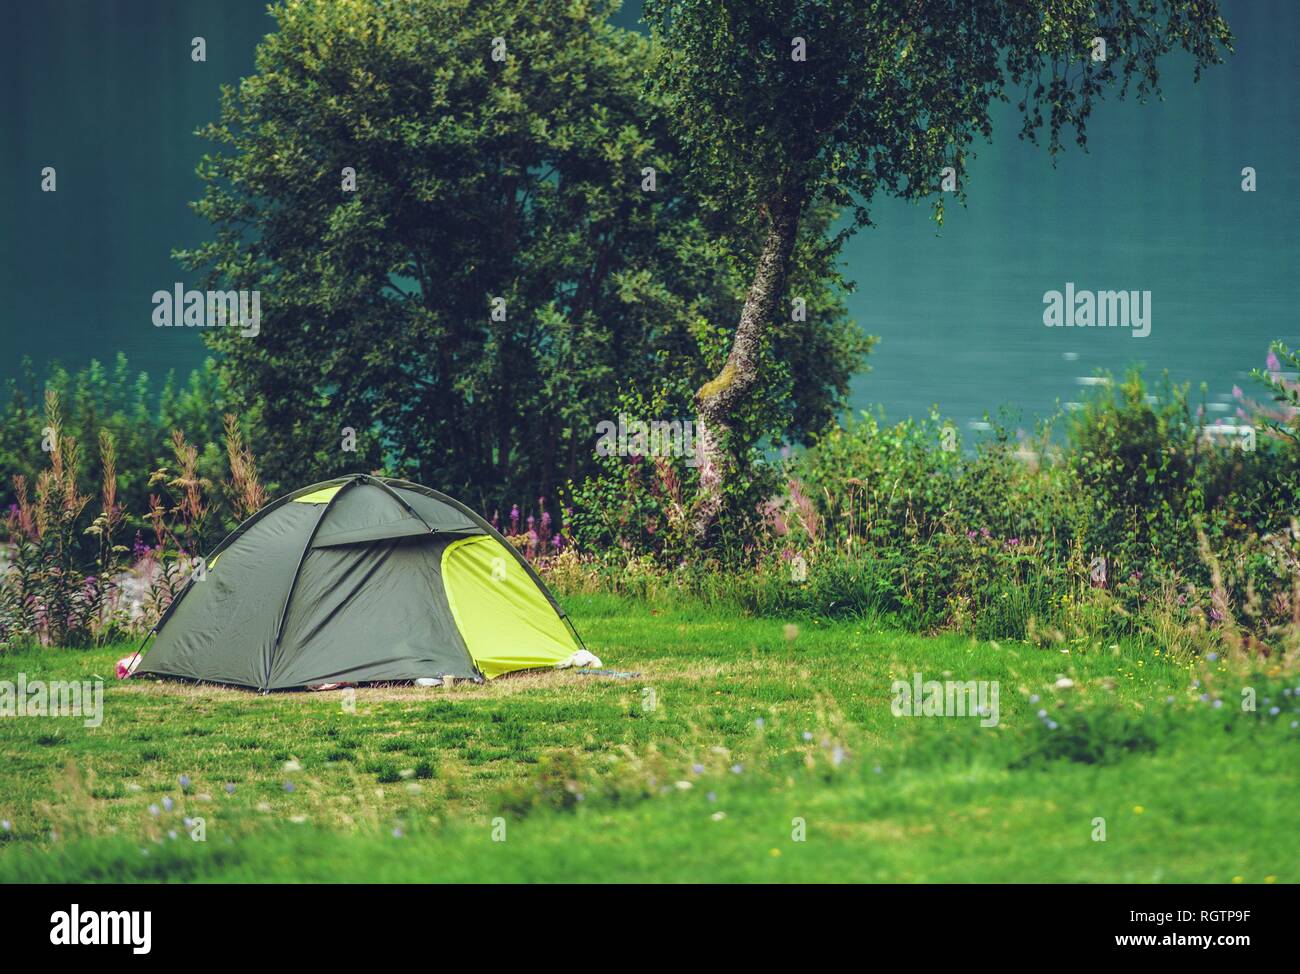 Tent Camping in the Wild. Summer Time Outdoor Vacation. Campsite and Small Tent. Stock Photo